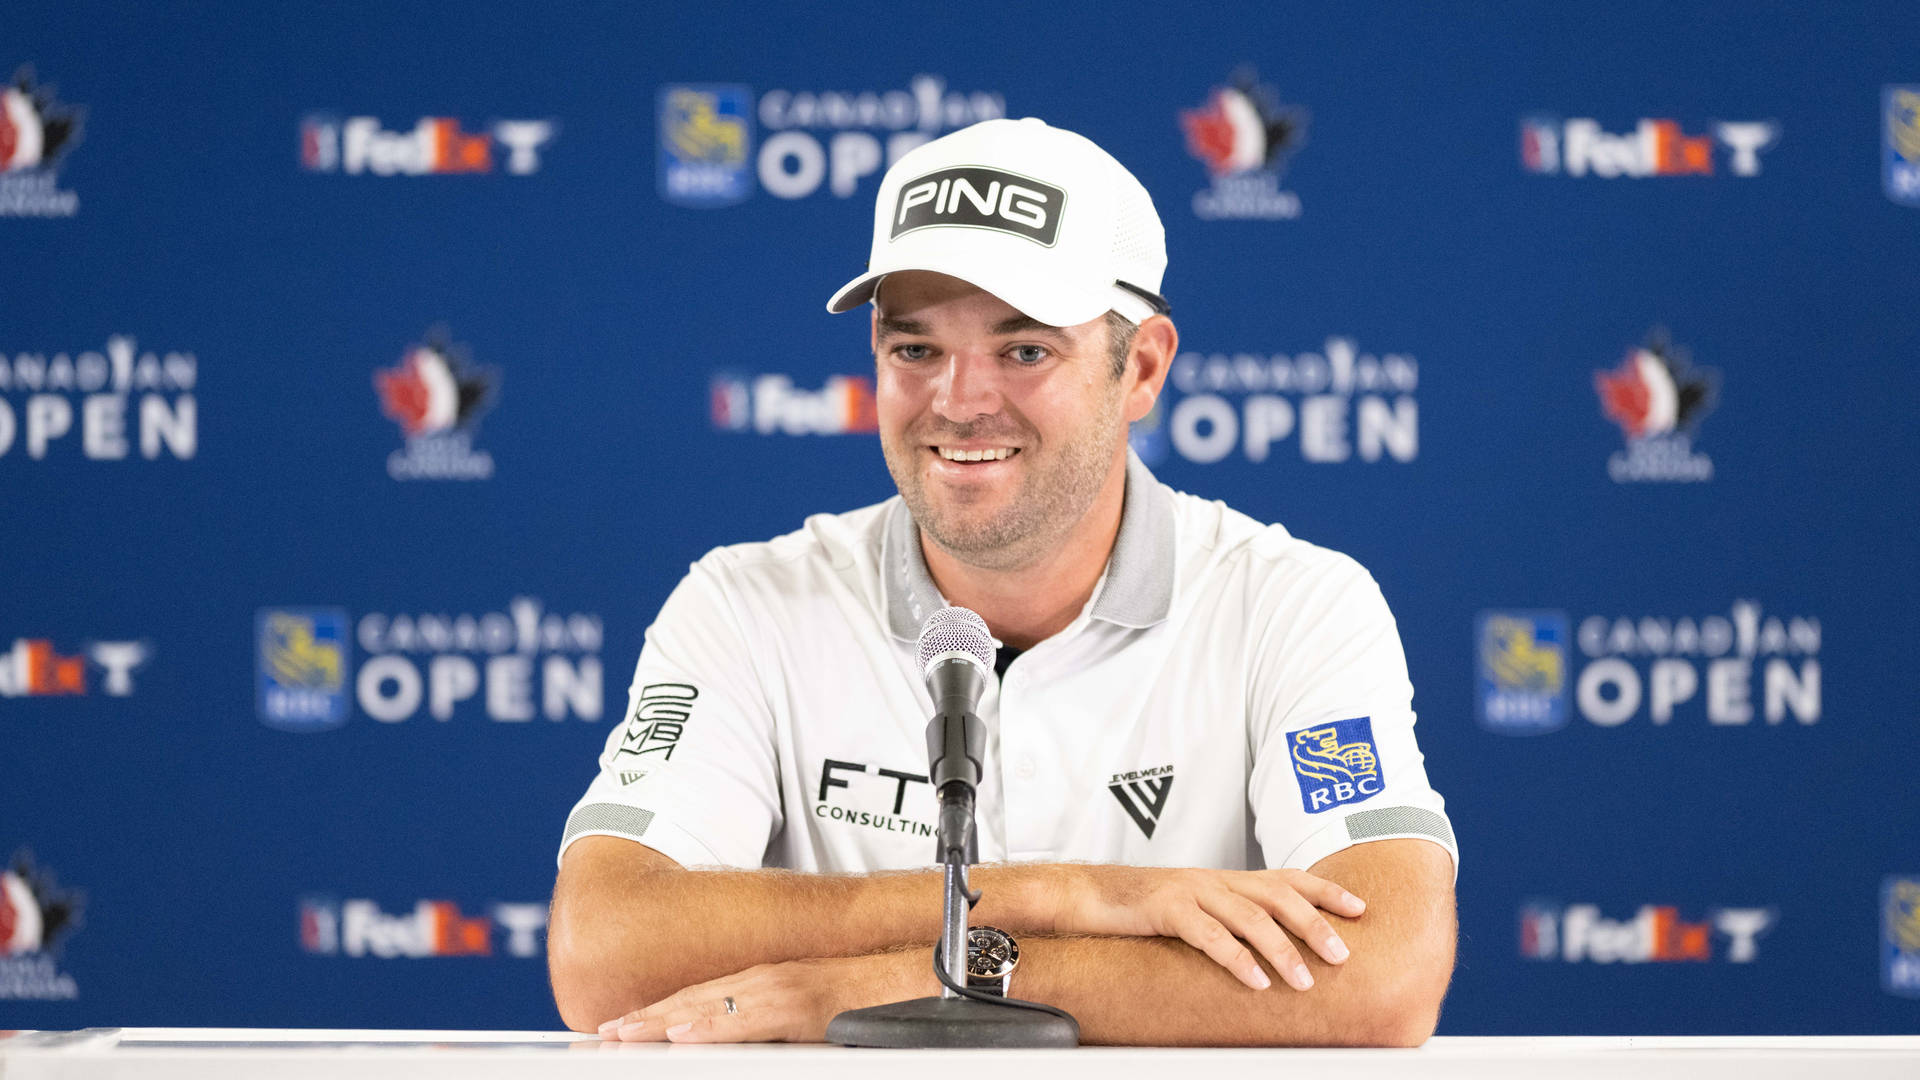 Professional Golfer Corey Conners during an Interview Wallpaper